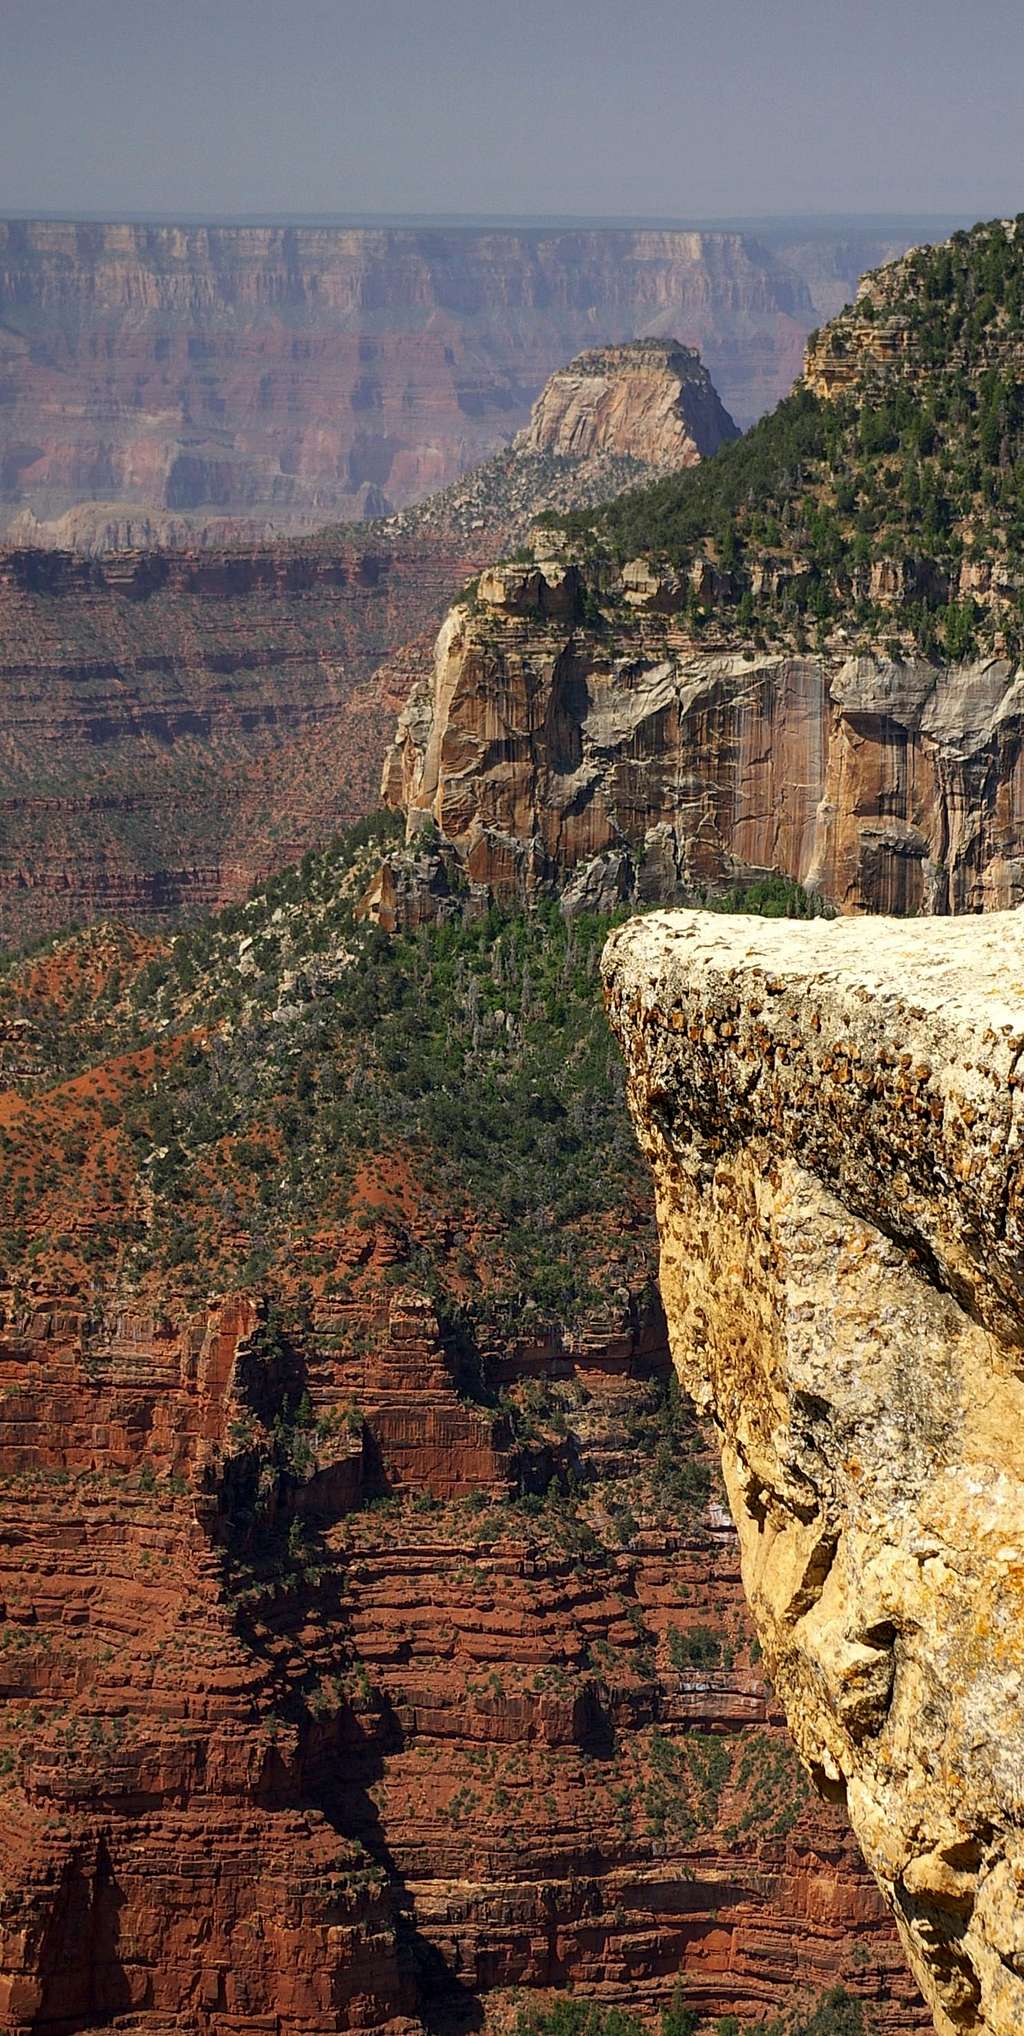 Cross Section of the Canyon